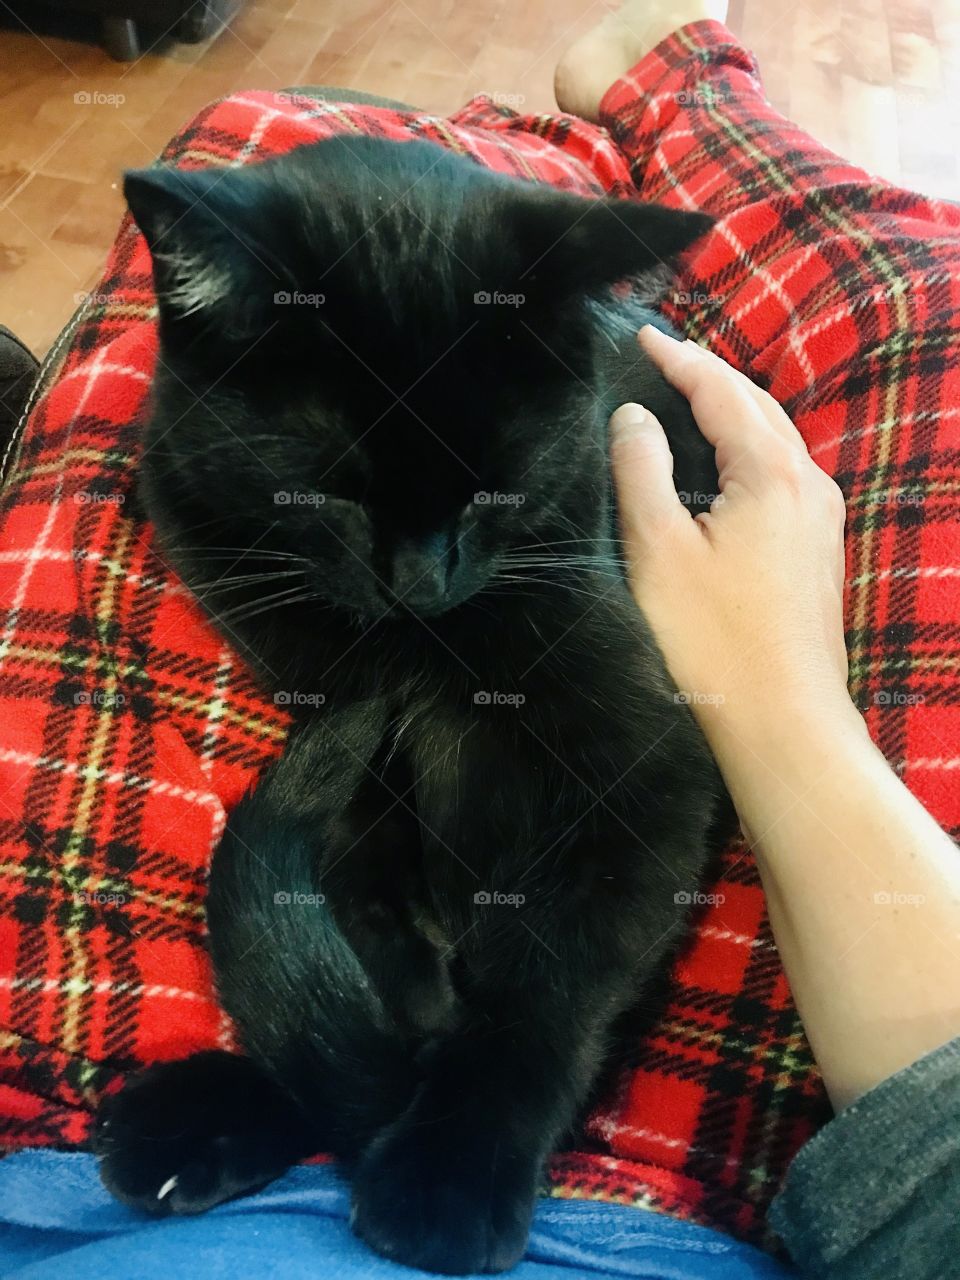 Every morning my little black kitty and I enjoy our secret ritual of cuddling together before breakfast. 